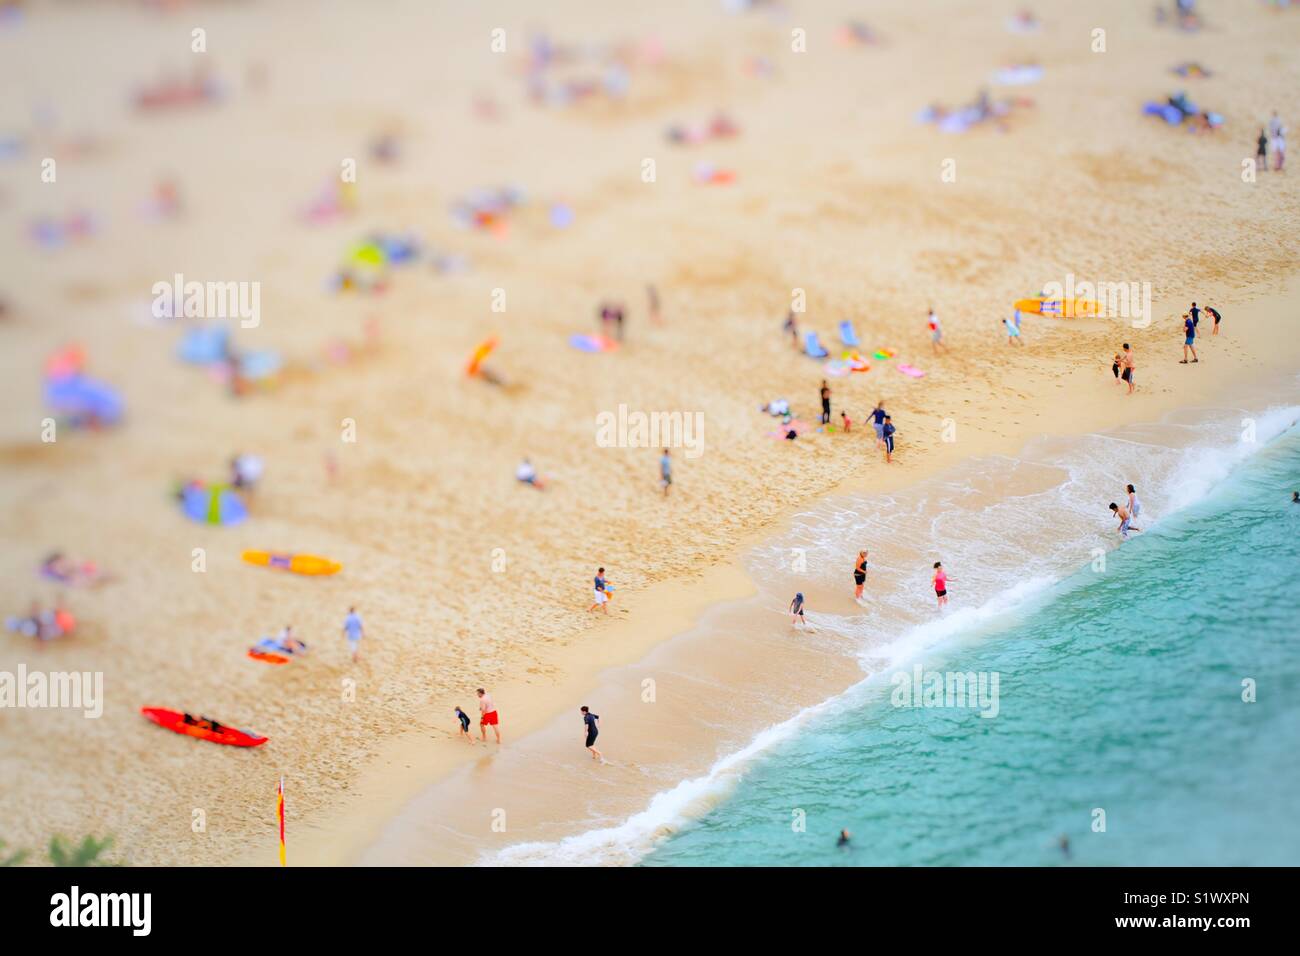 An aerial view of a busy sandy beach during summer vacation showing families and friends playing, surfing and swimming in the emerald, green ocean from above. Stock Photo